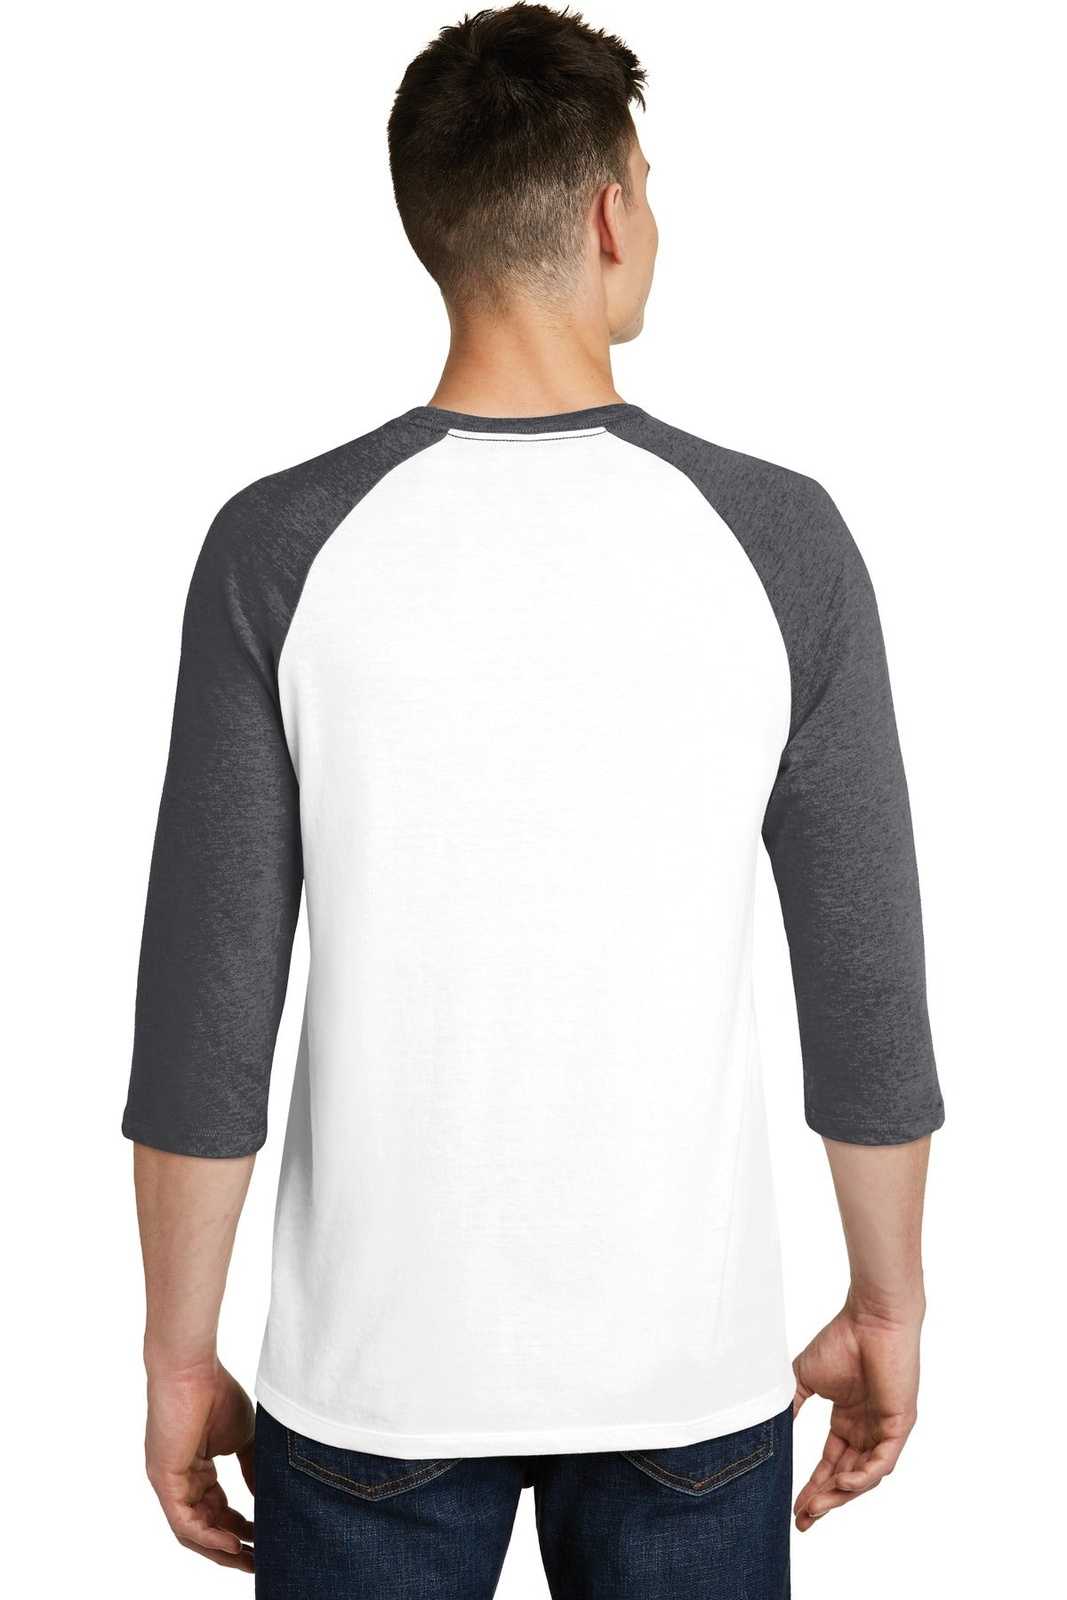 District DT6210 Very Important Tee 3/4-Sleeve Raglan - Heathered Charcoal White - HIT a Double - 1